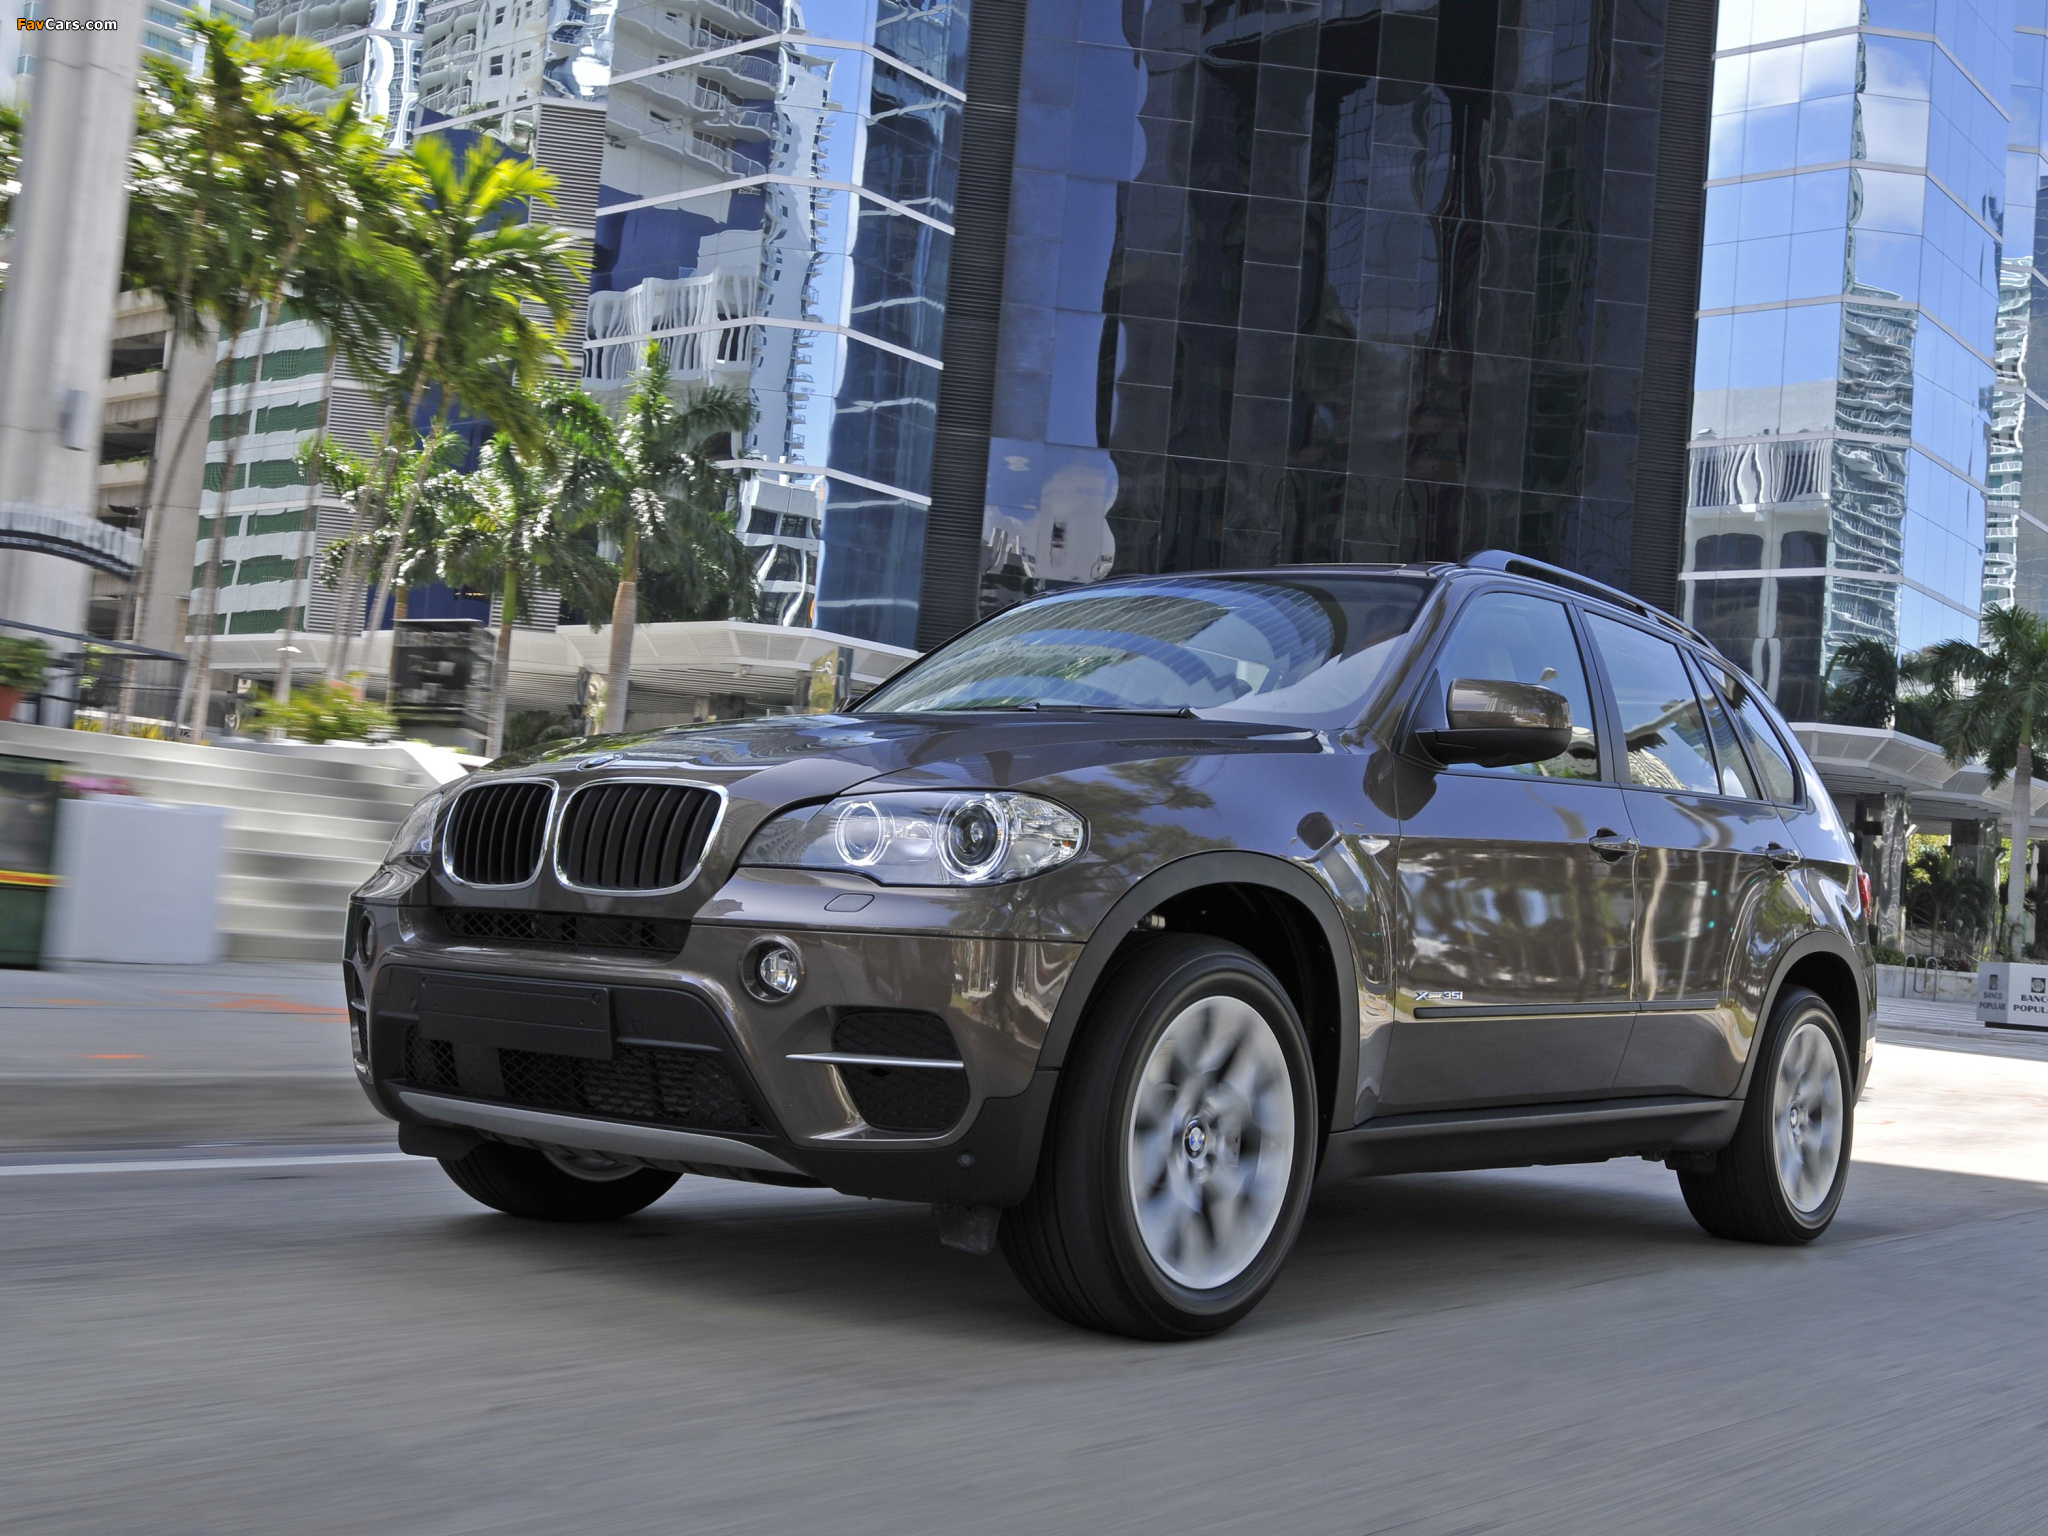 BMW X5 xDrive35i (E70) 2010 pictures (2048 x 1536)